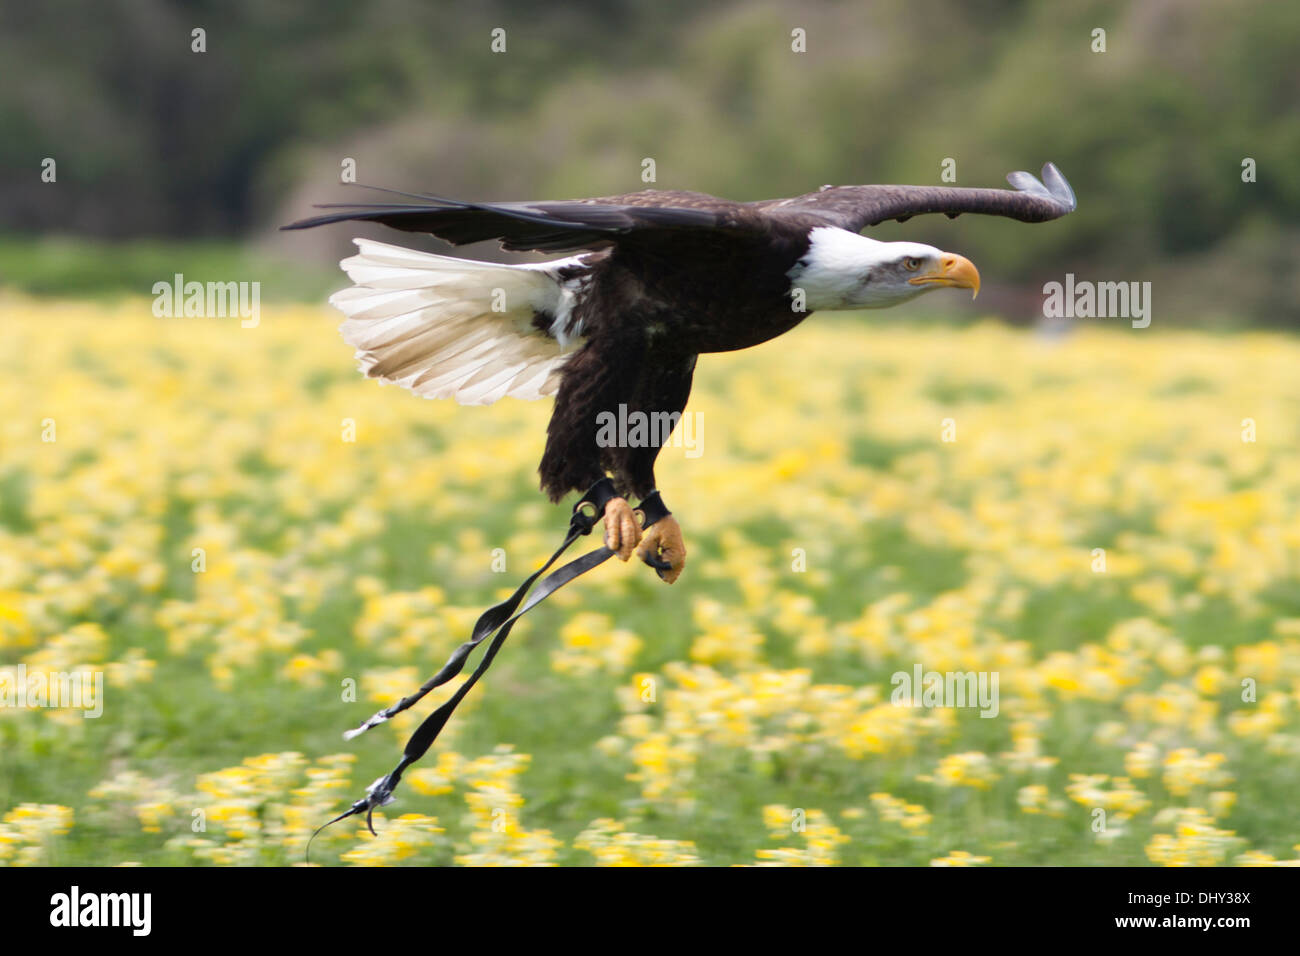 Captive North American Bald Eagle just released from falconer's glove. April Stock Photo